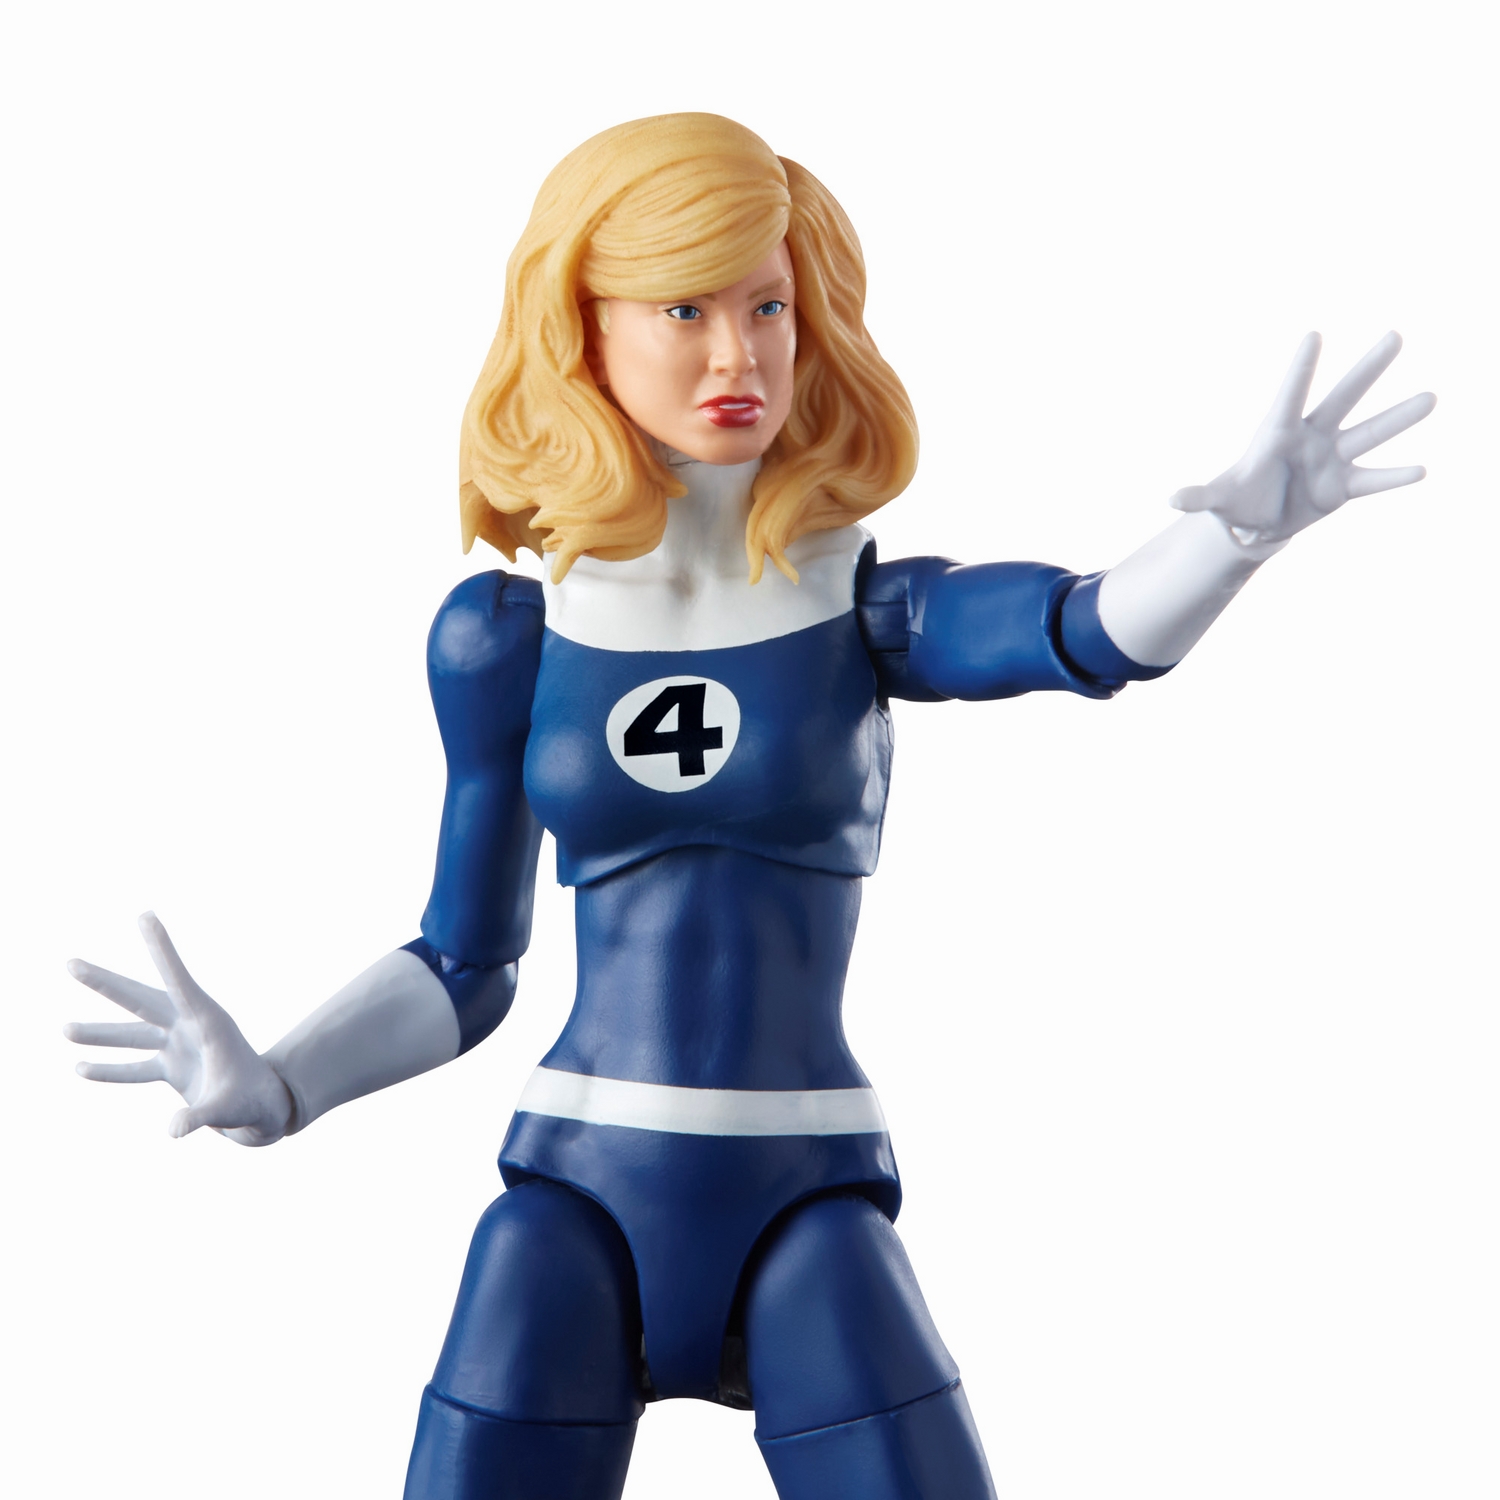 MARVEL LEGENDS SERIES 6-INCH RETRO FANTASTIC FOUR MARVEL'S INVISIBLE WOMAN Figure_oop 2.jpg